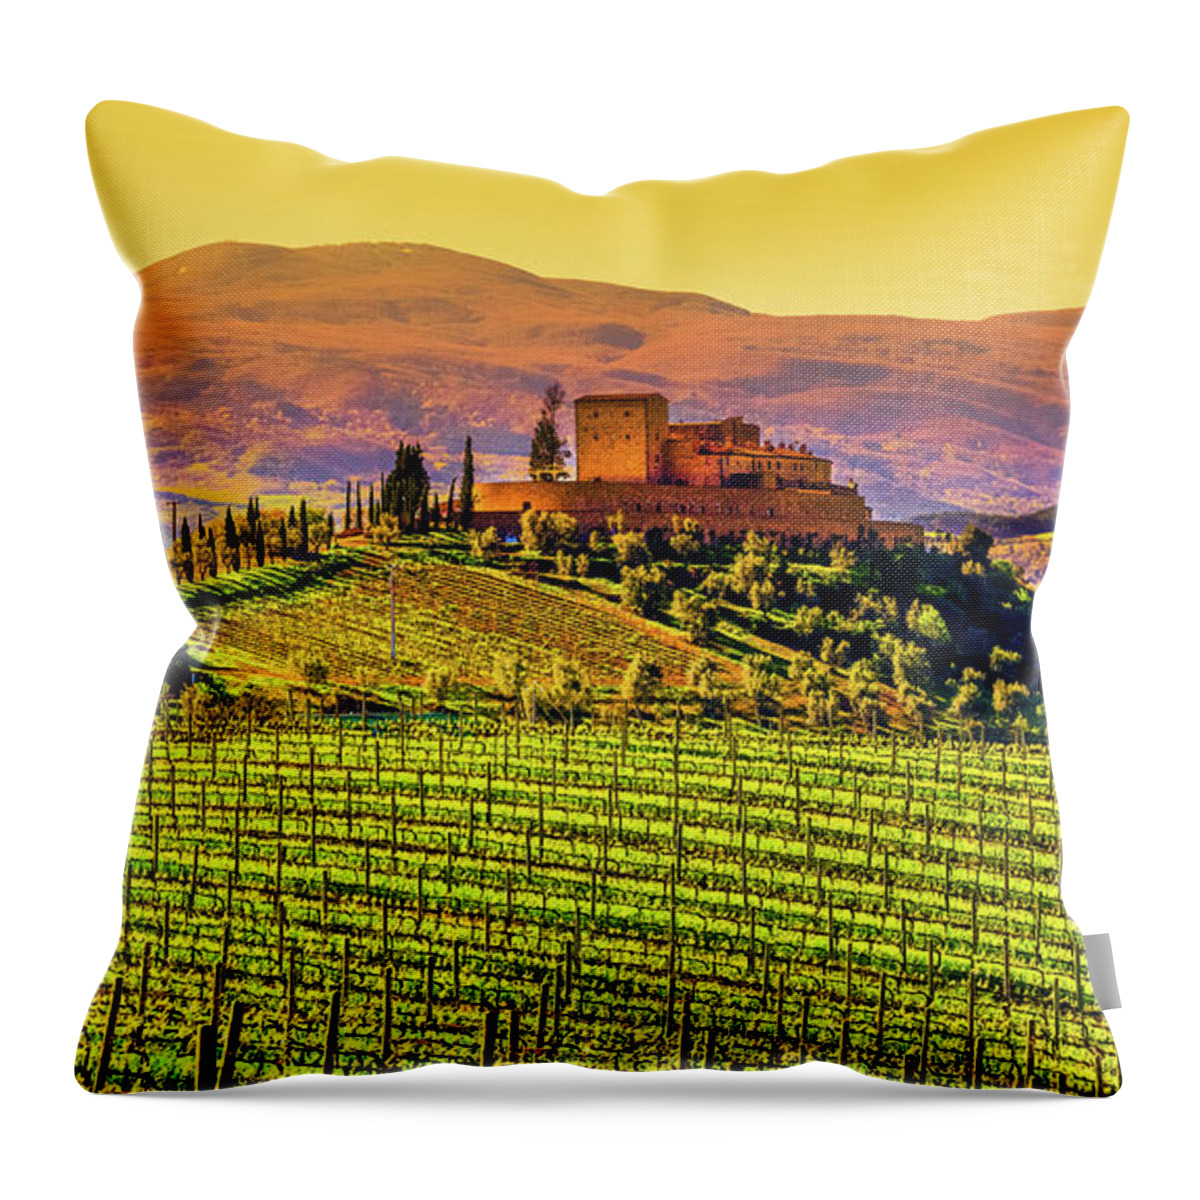 Scenics Throw Pillow featuring the photograph Vineyard In Tuscany by Deimagine